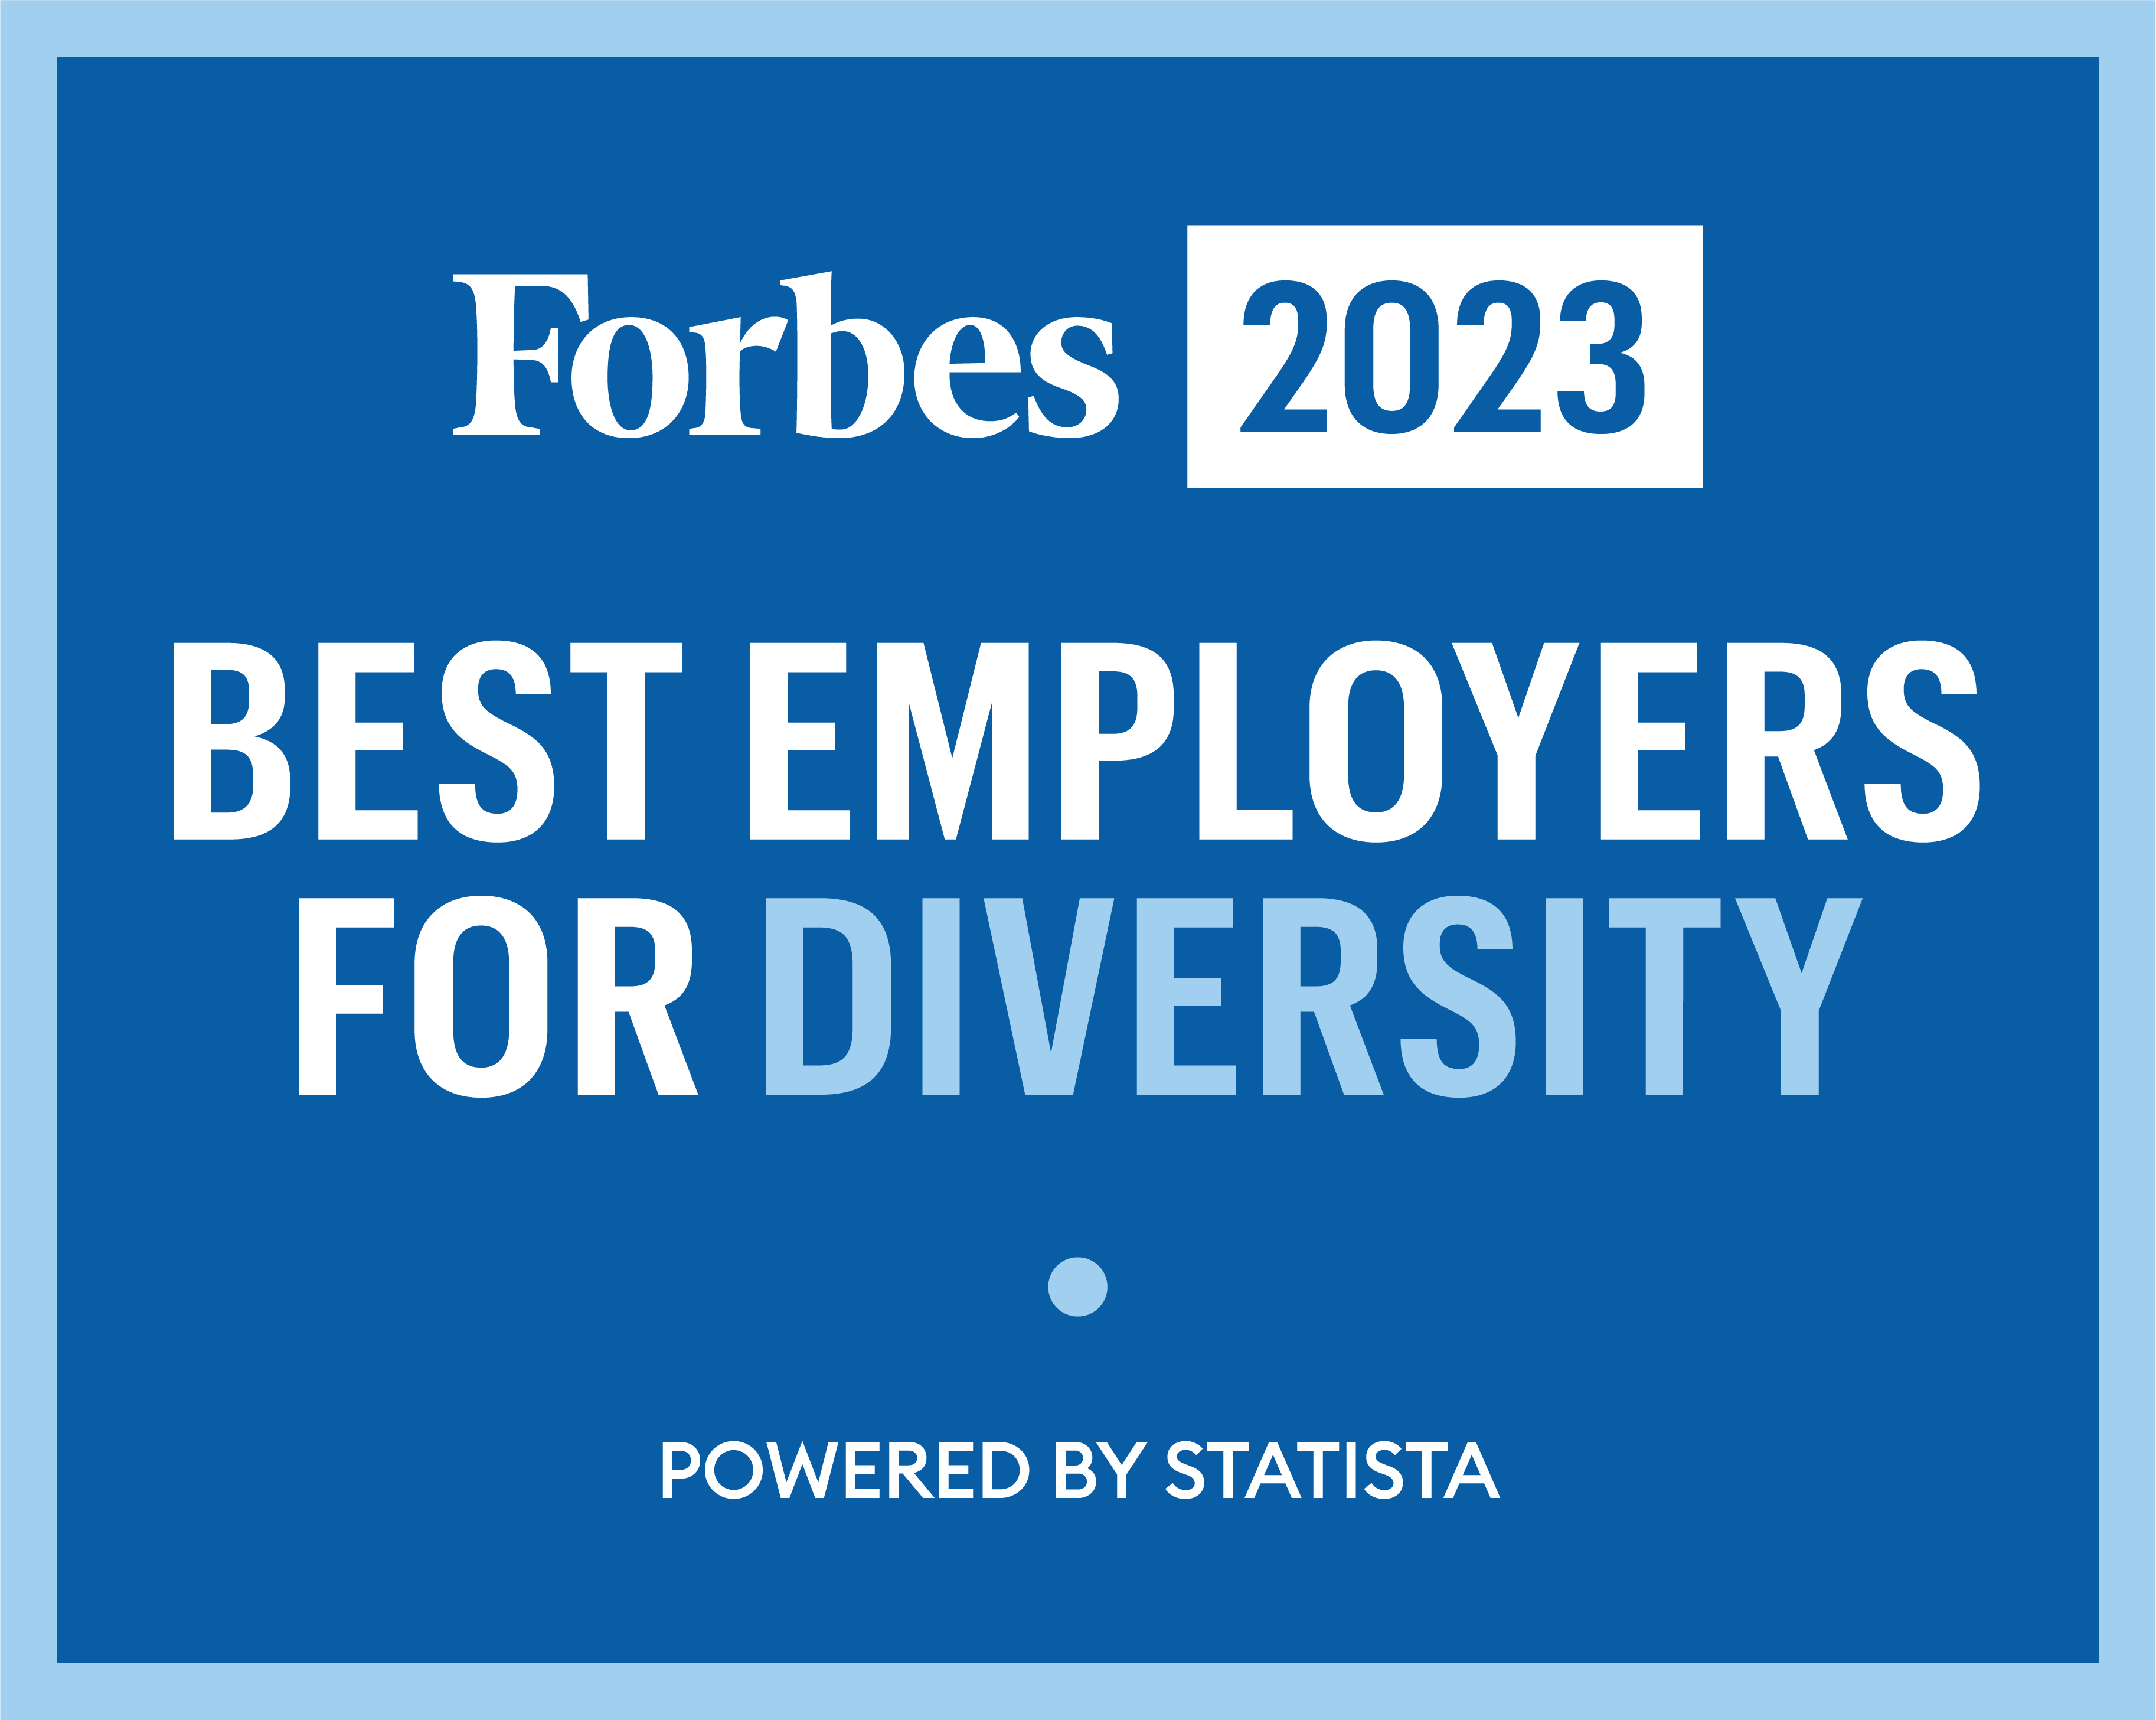 MD Anderson award - Forbes 2022 Best Employers Diversity